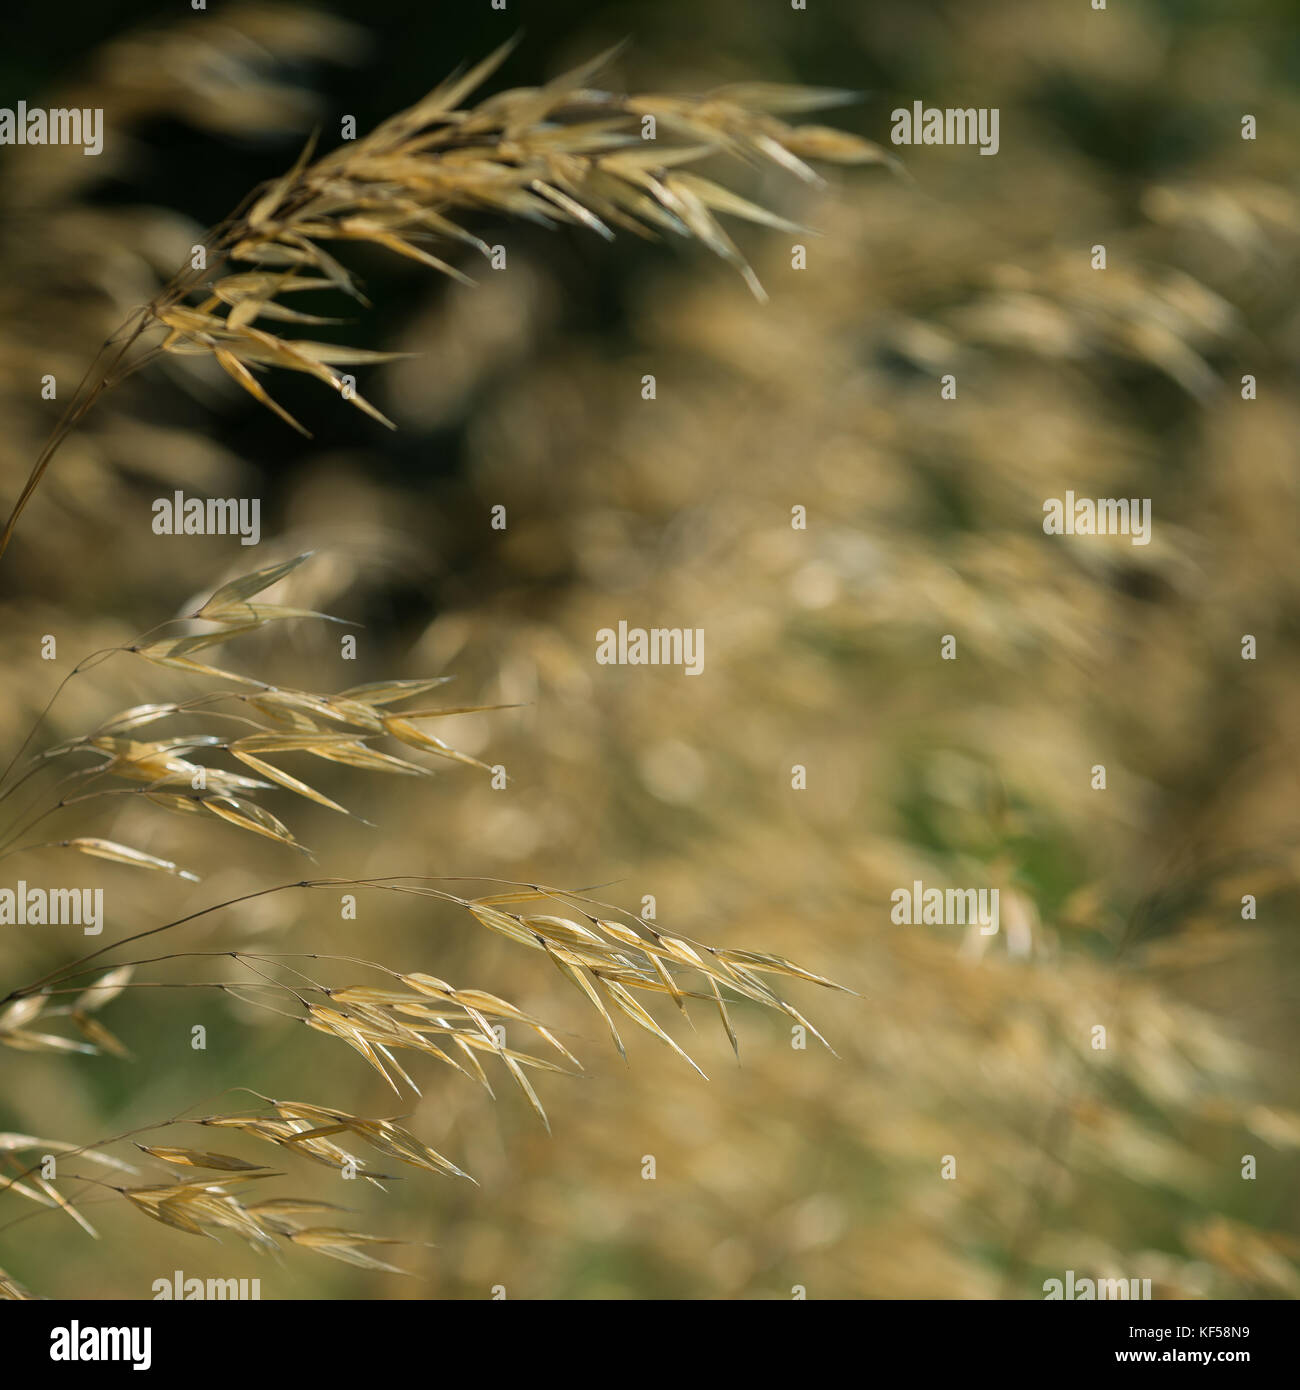 Stipa gigantea commonly known as giant feather grass in Kew Royal Botanic Gardens in London, United Kingdom Stock Photo